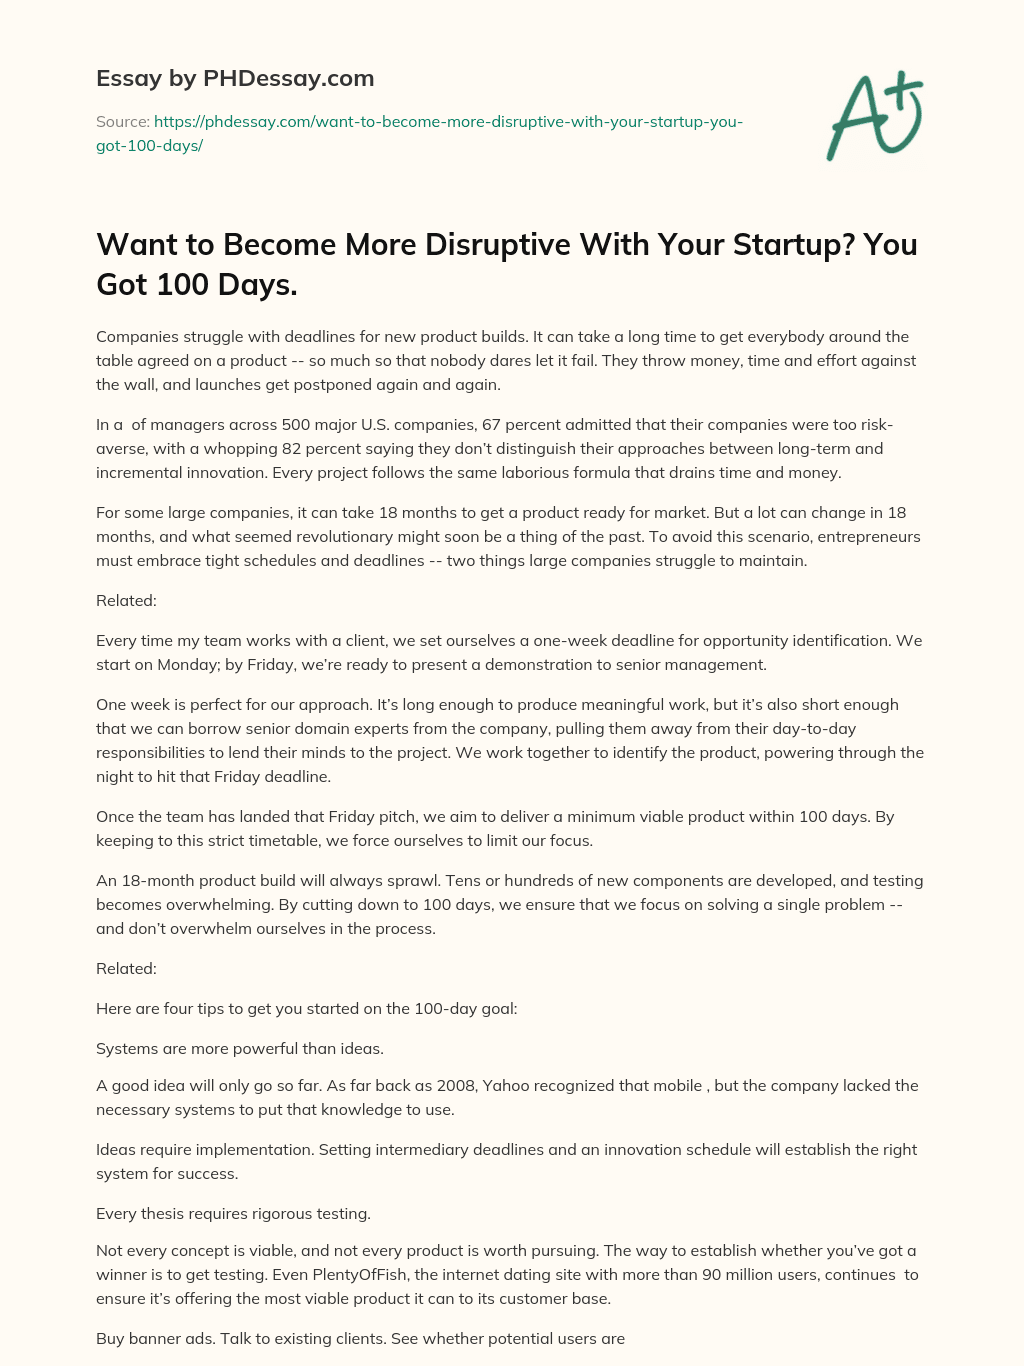 Want to Become More Disruptive With Your Startup? You Got 100 Days. essay